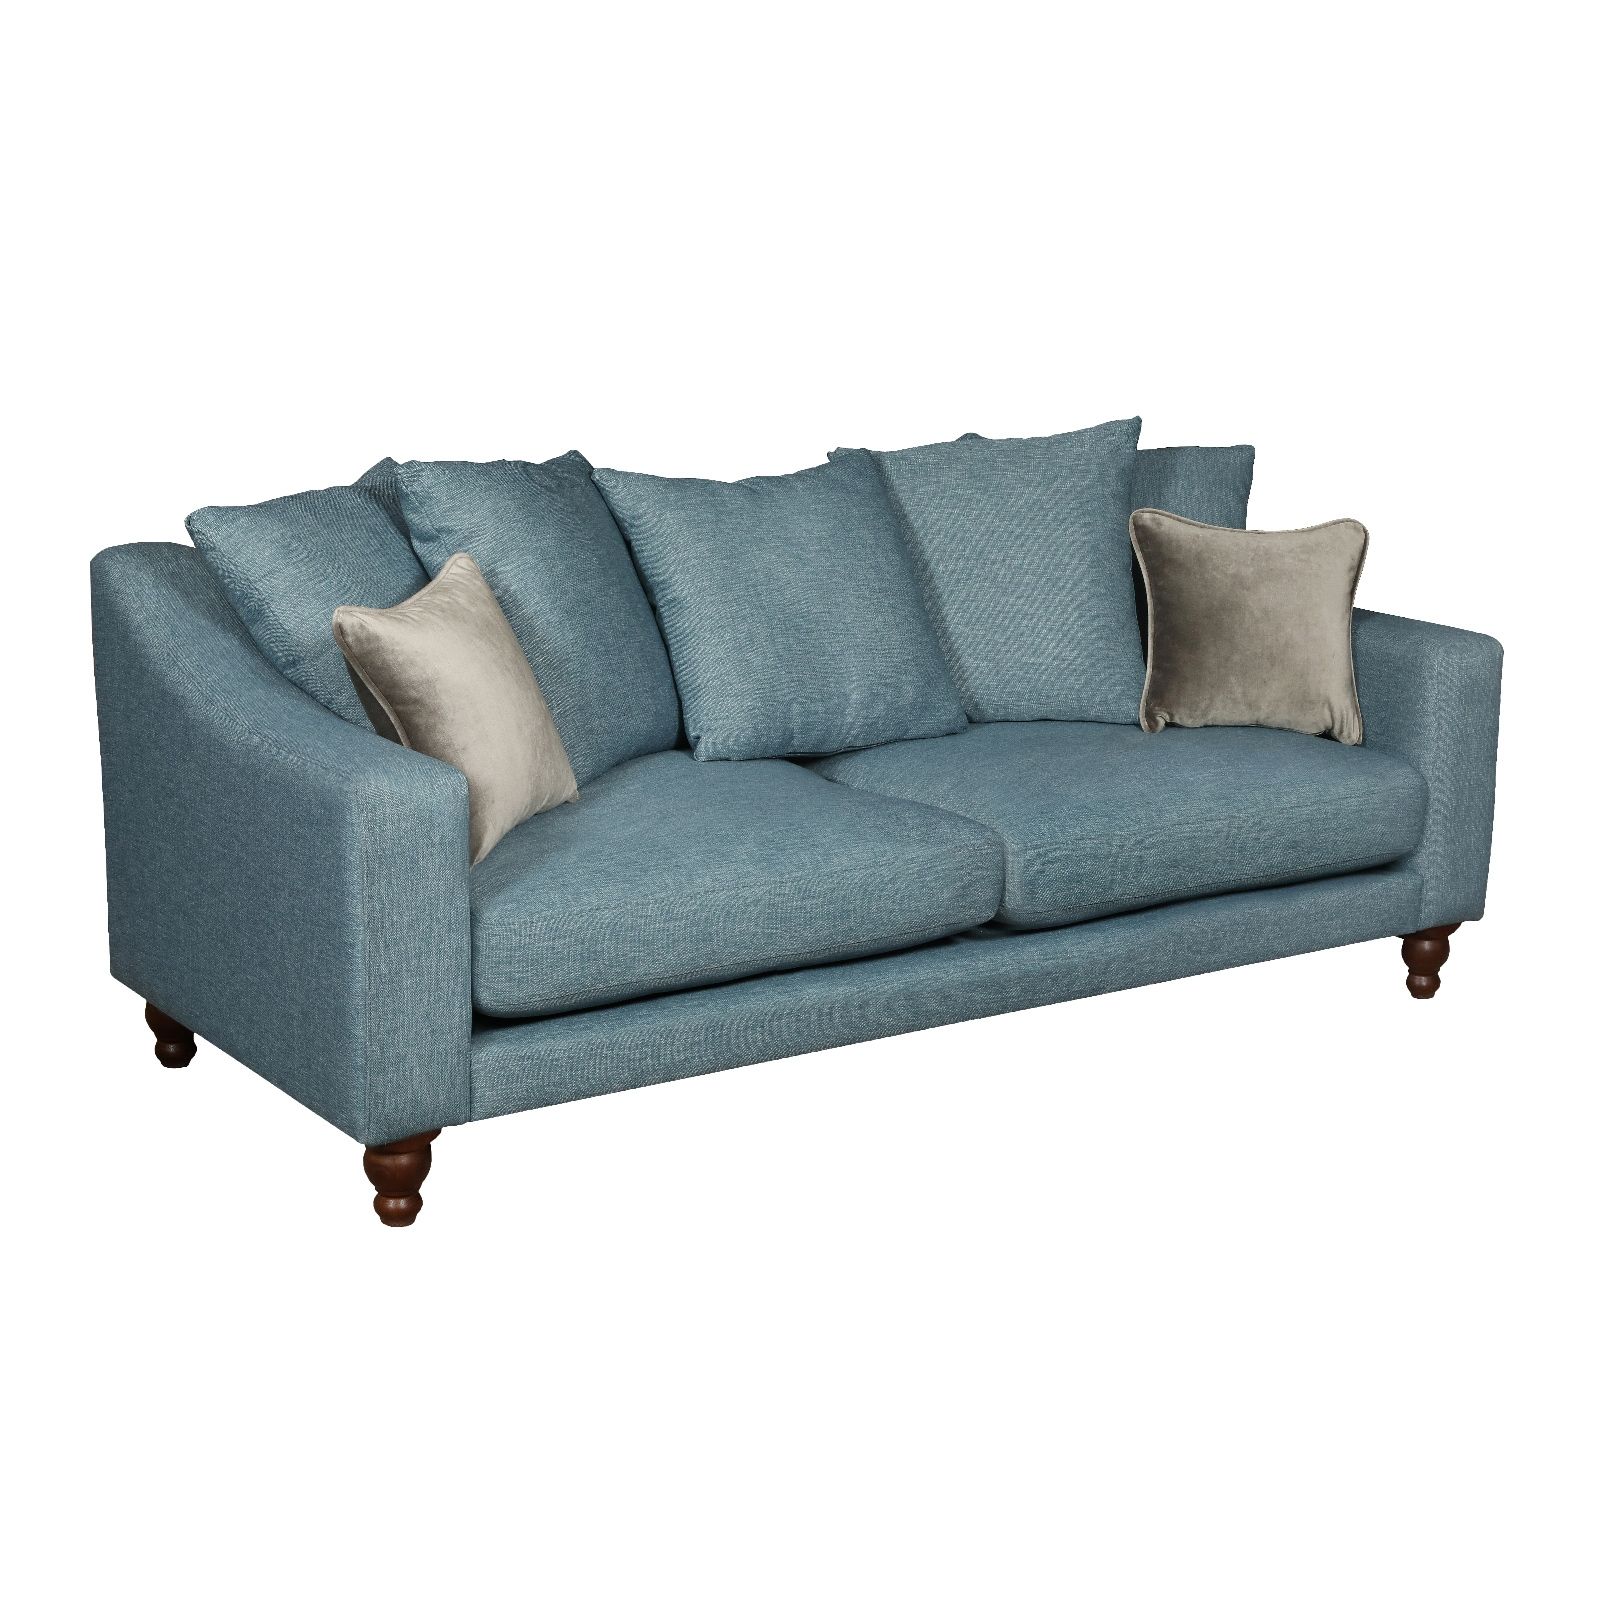 Vintage Penryn Pillowback 3 Seater Sofa – Vintage Kernow – Carlton With Sofas With Pillowback Wood Bases (Gallery 17 of 20)